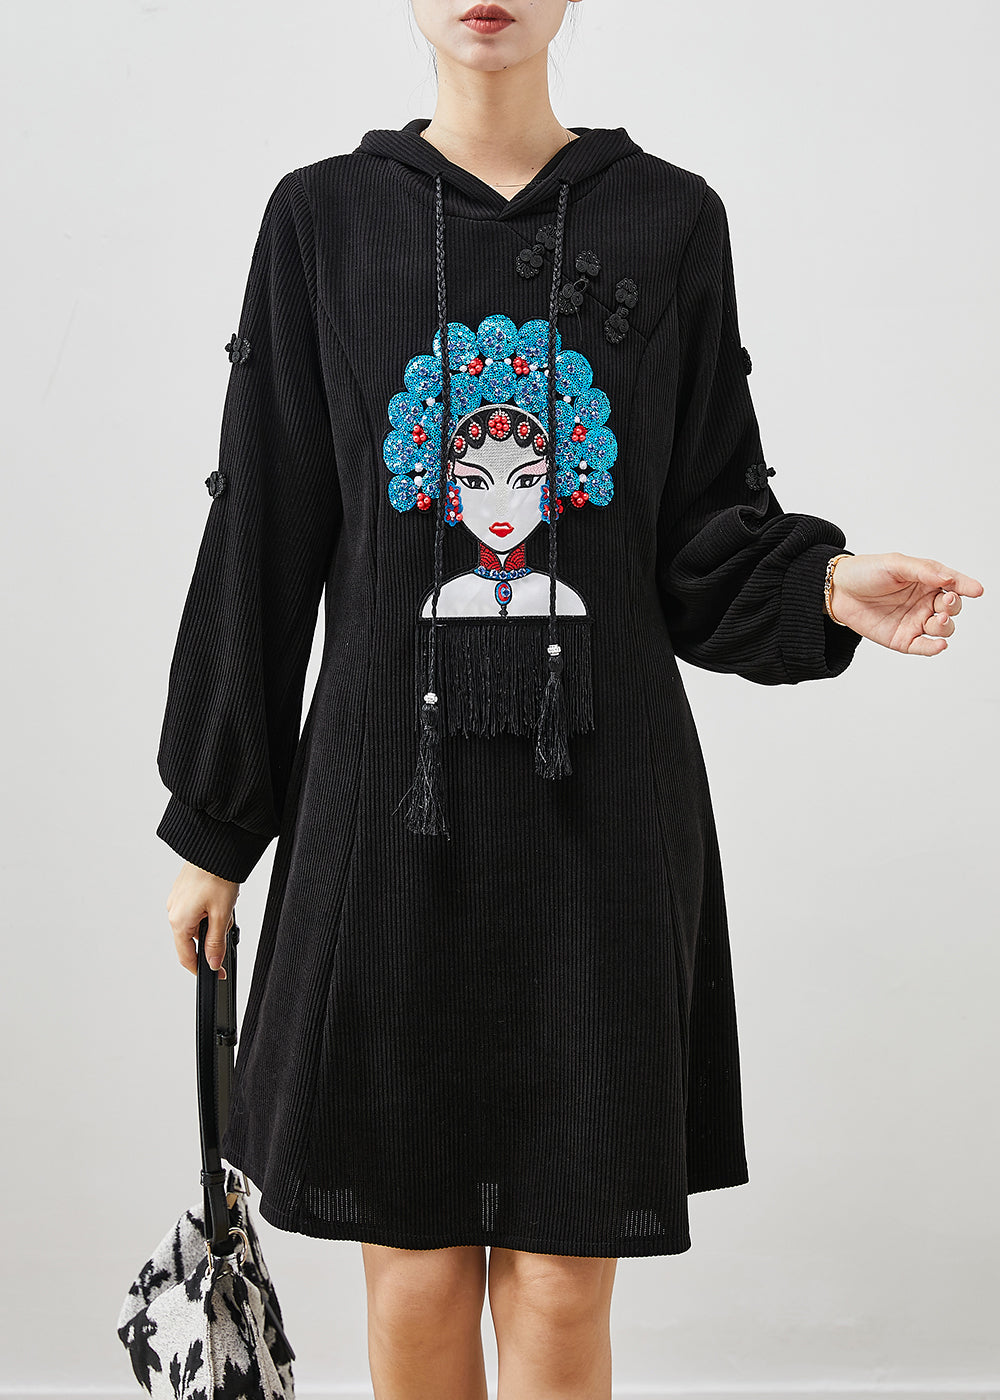 Chic Black Embroideried Chinese Button Corduroy Dress Spring